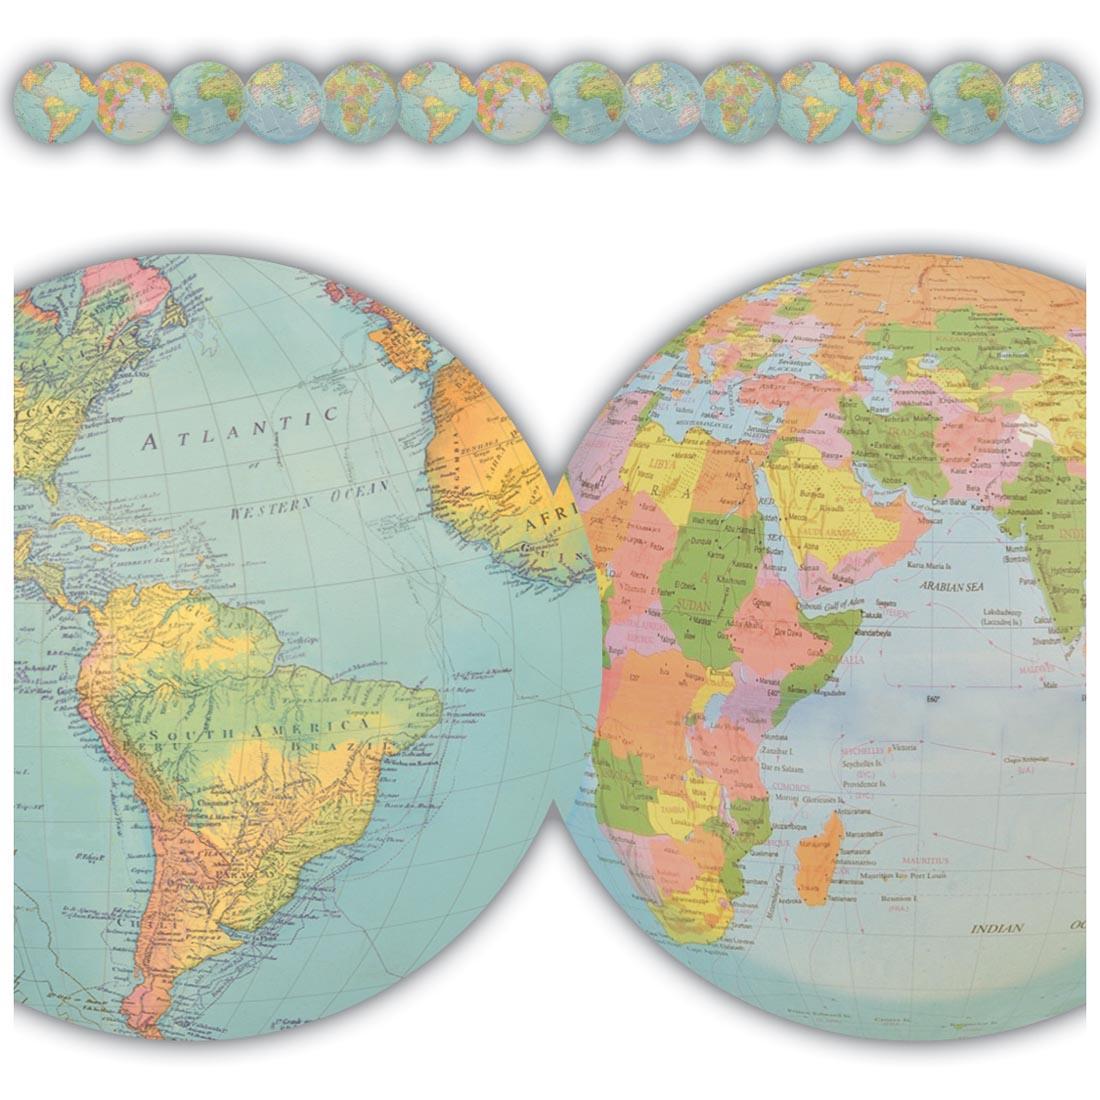 Full view and closeup of the Globes Die-Cut Border Trim from the Travel the Map collection by Teacher Created Resources